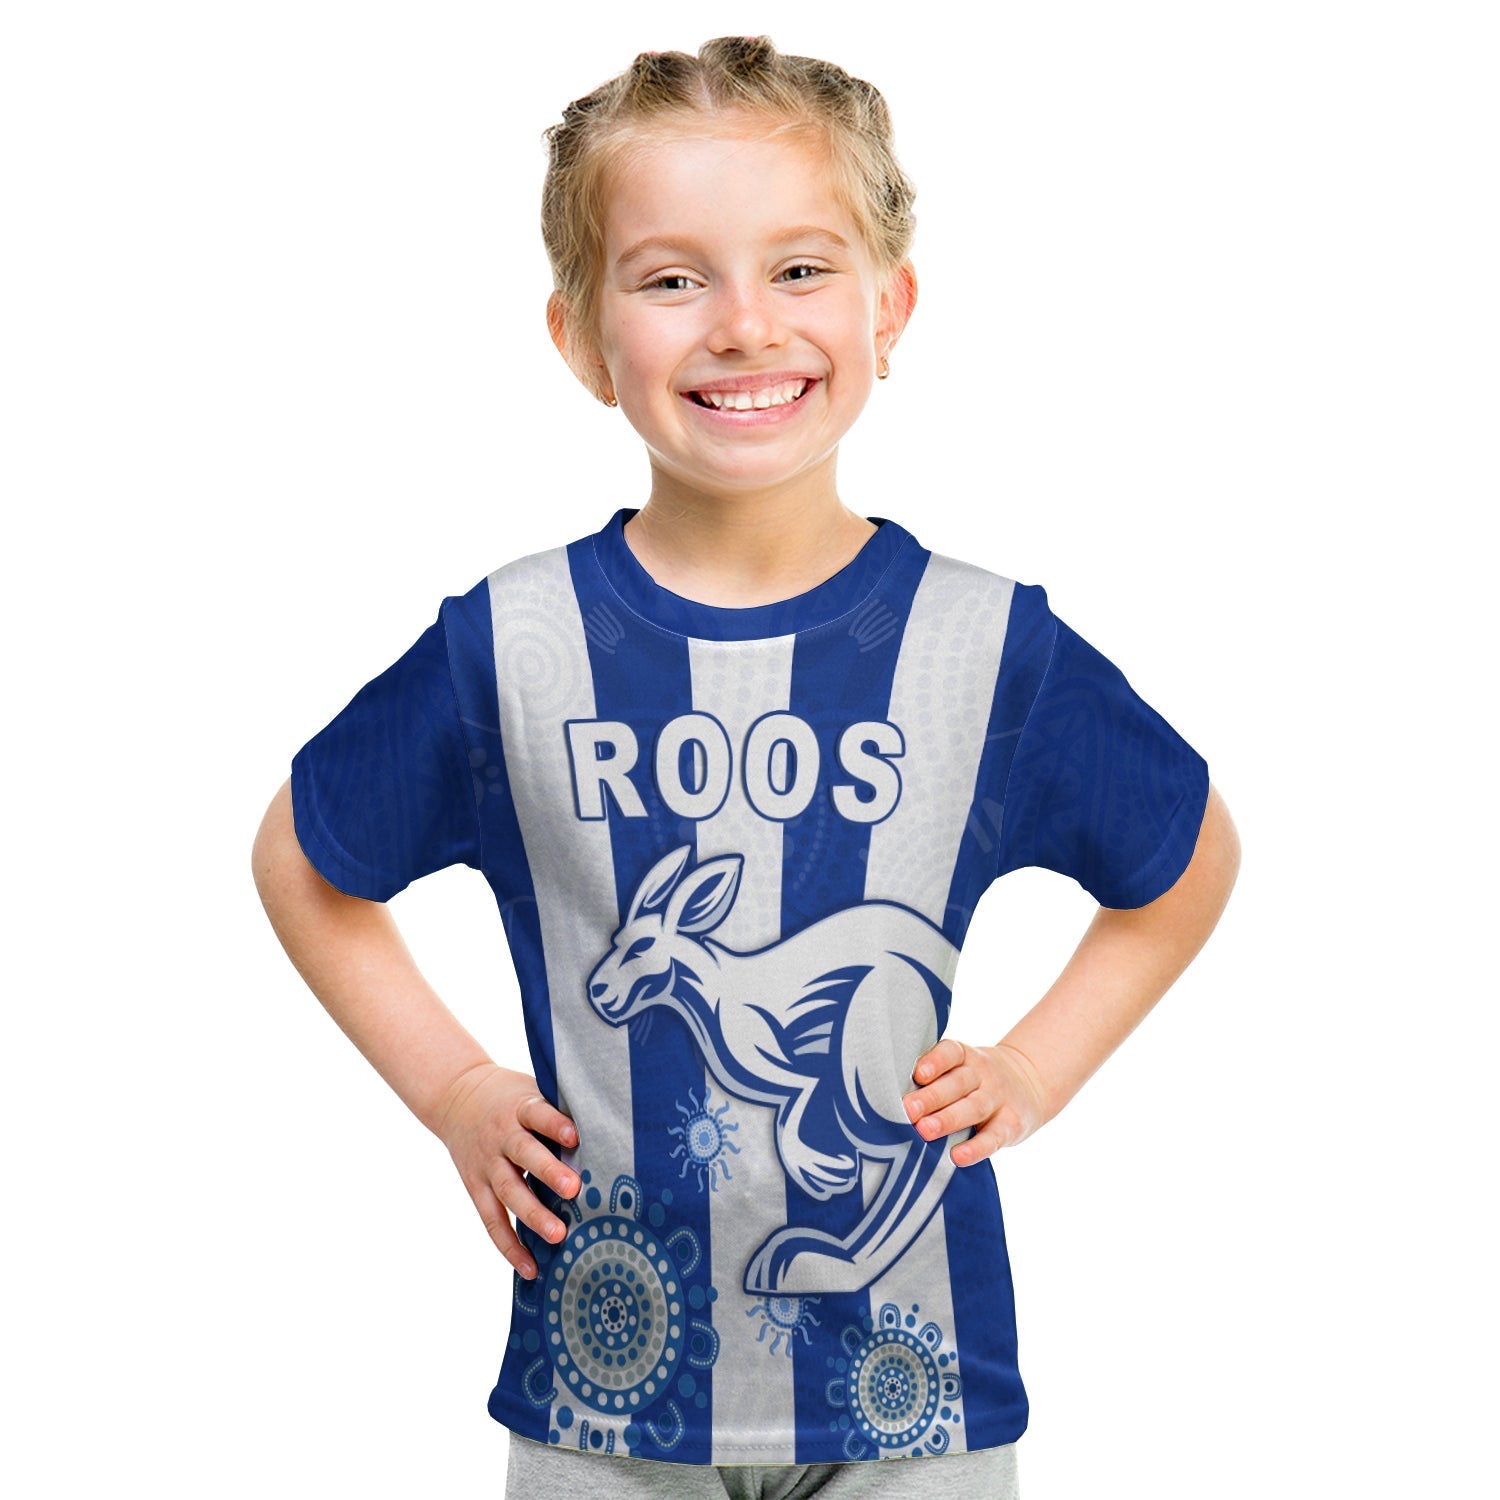 custom-personalised-roos-football-north-melbourne-t-shirt-kid-simple-indigenous-custom-text-and-number-lt13